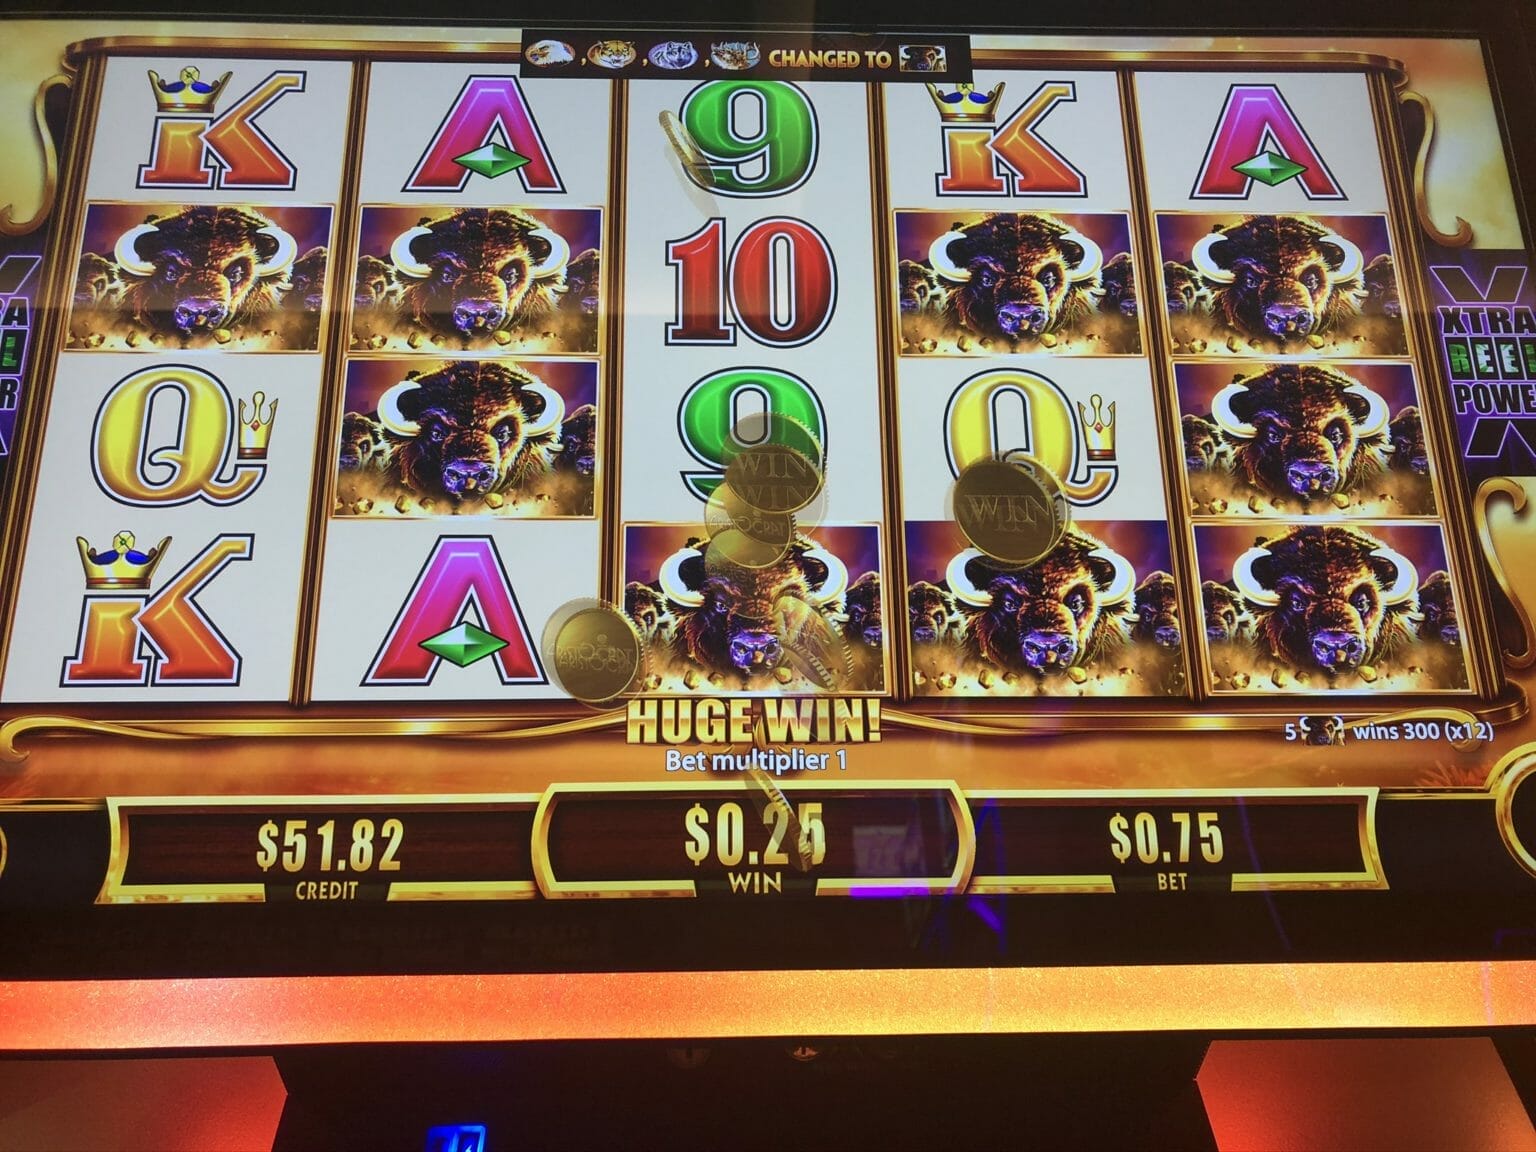 HUGE WIN 4 COIN RETRIGGER (Rare!) Buffalo Gold Slot Machines - TRY THIS!